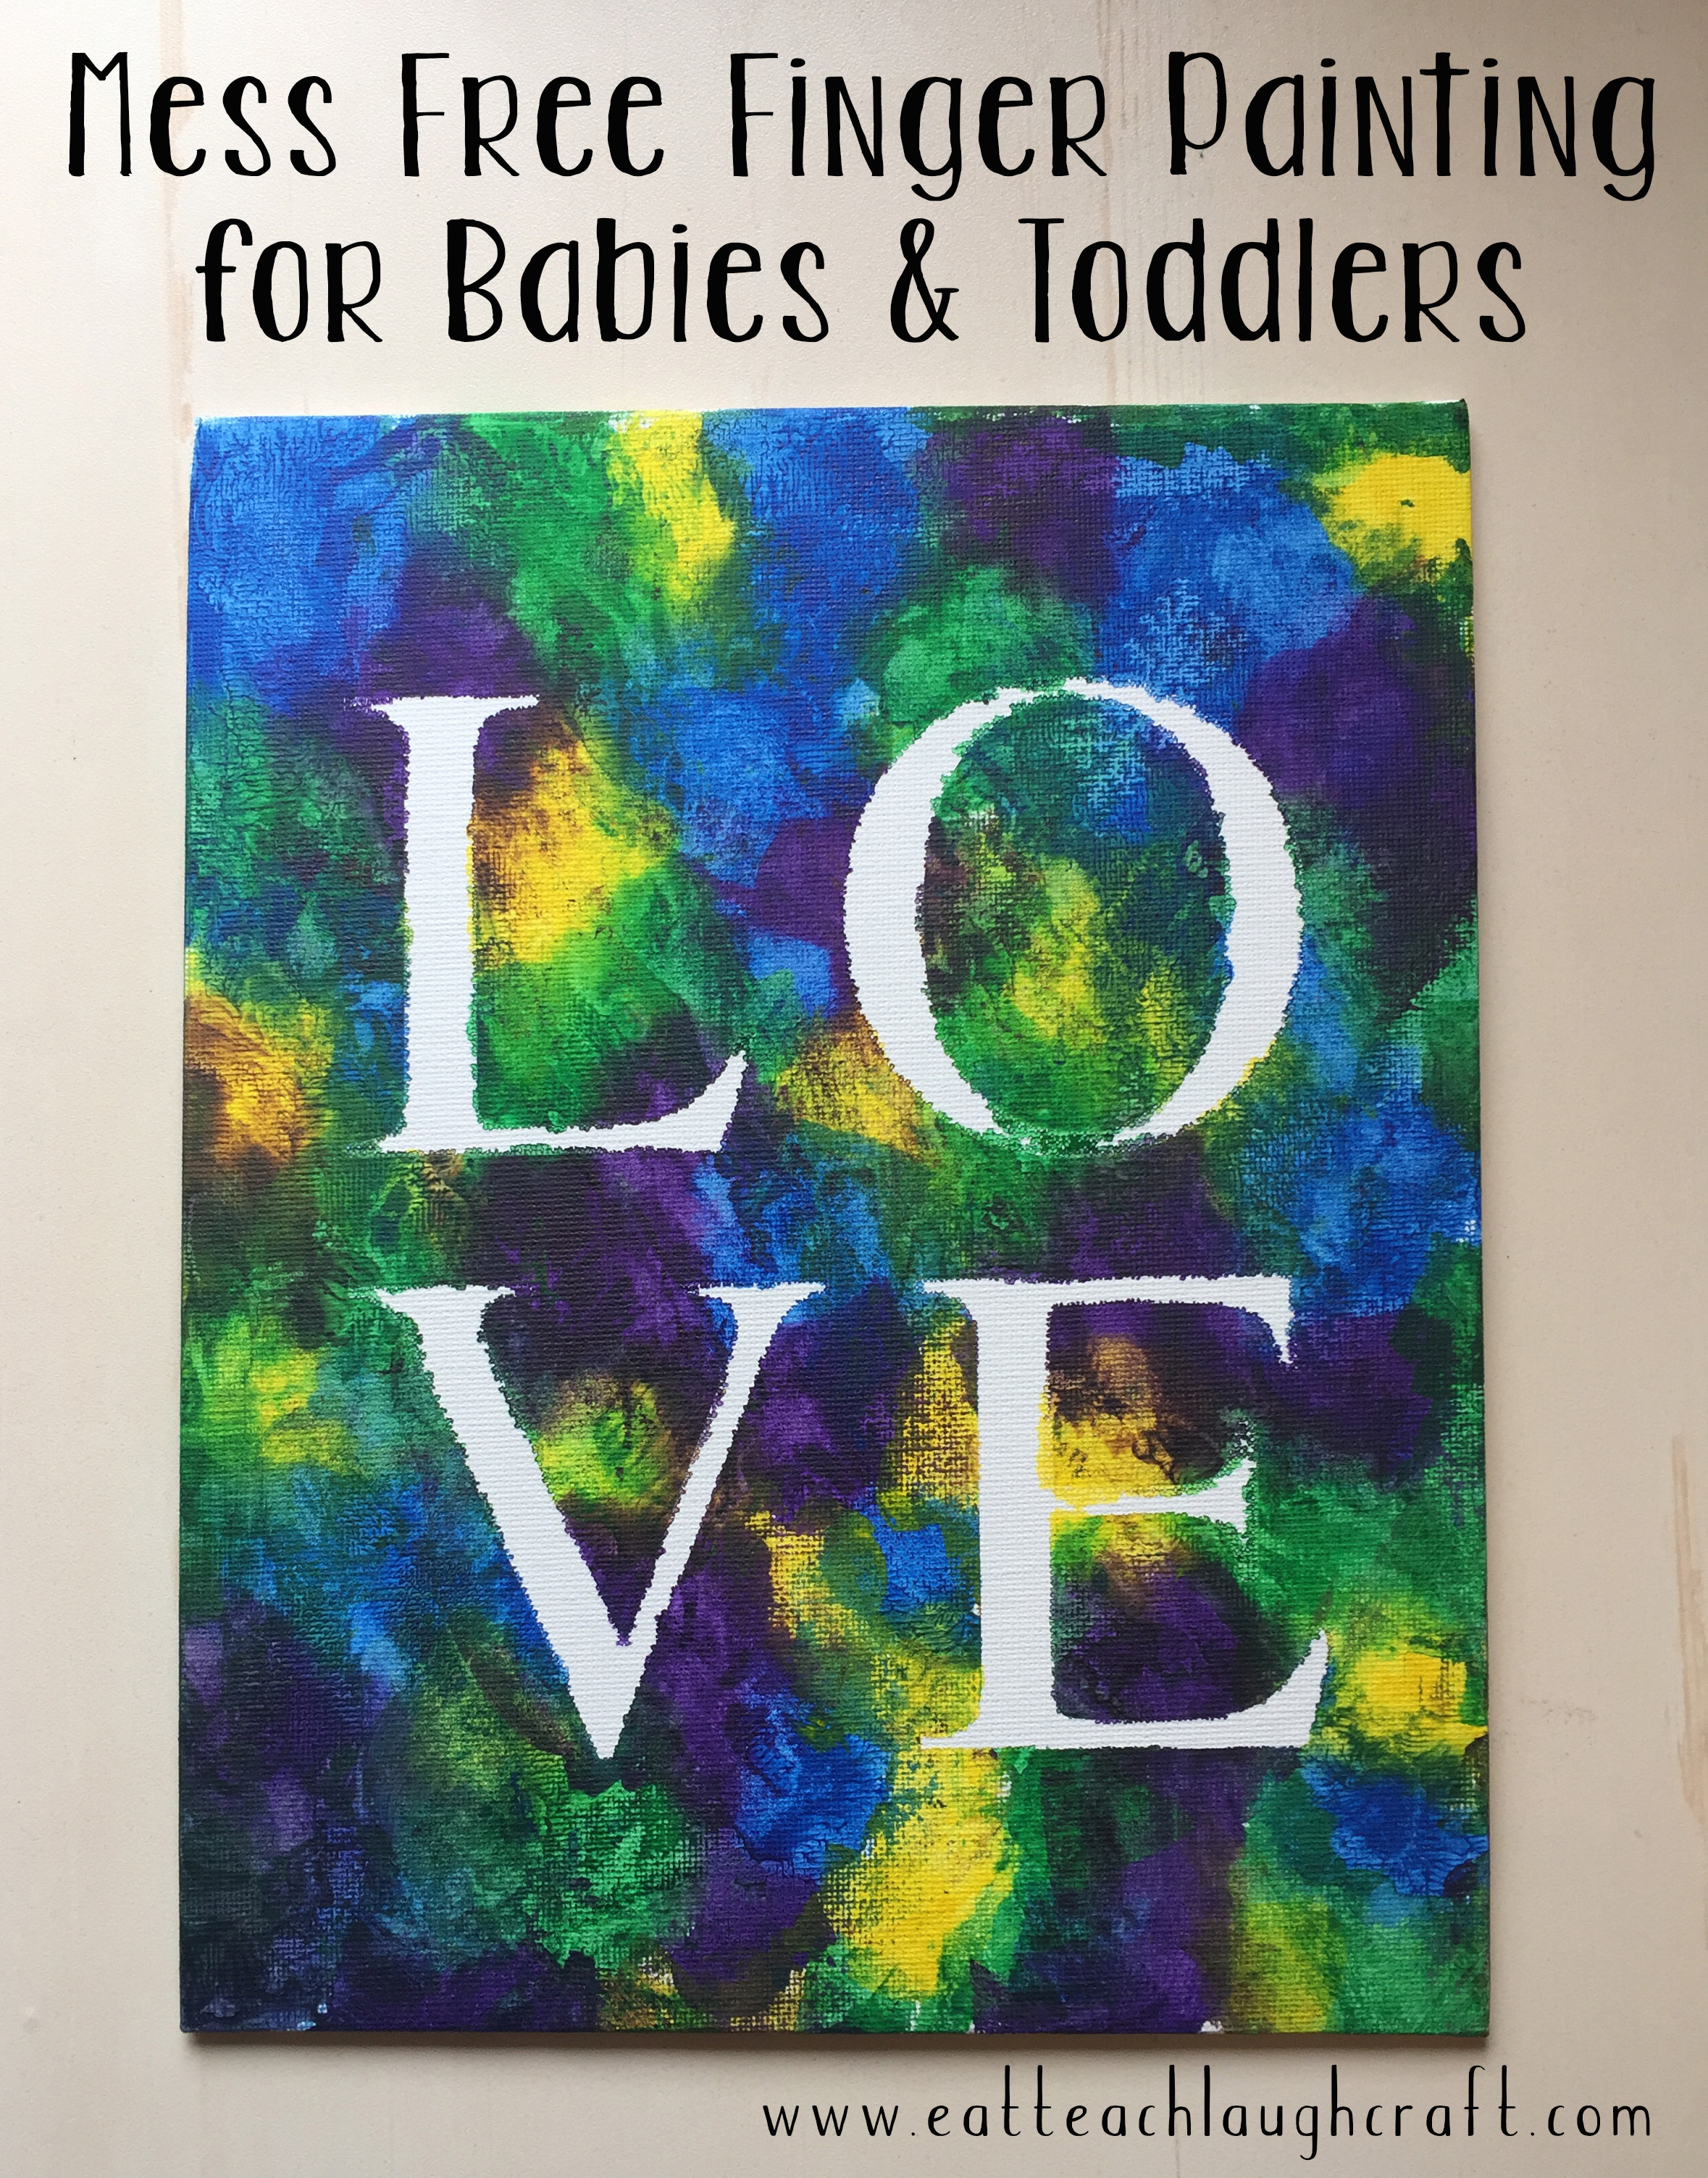 Mess free painting with your toddler